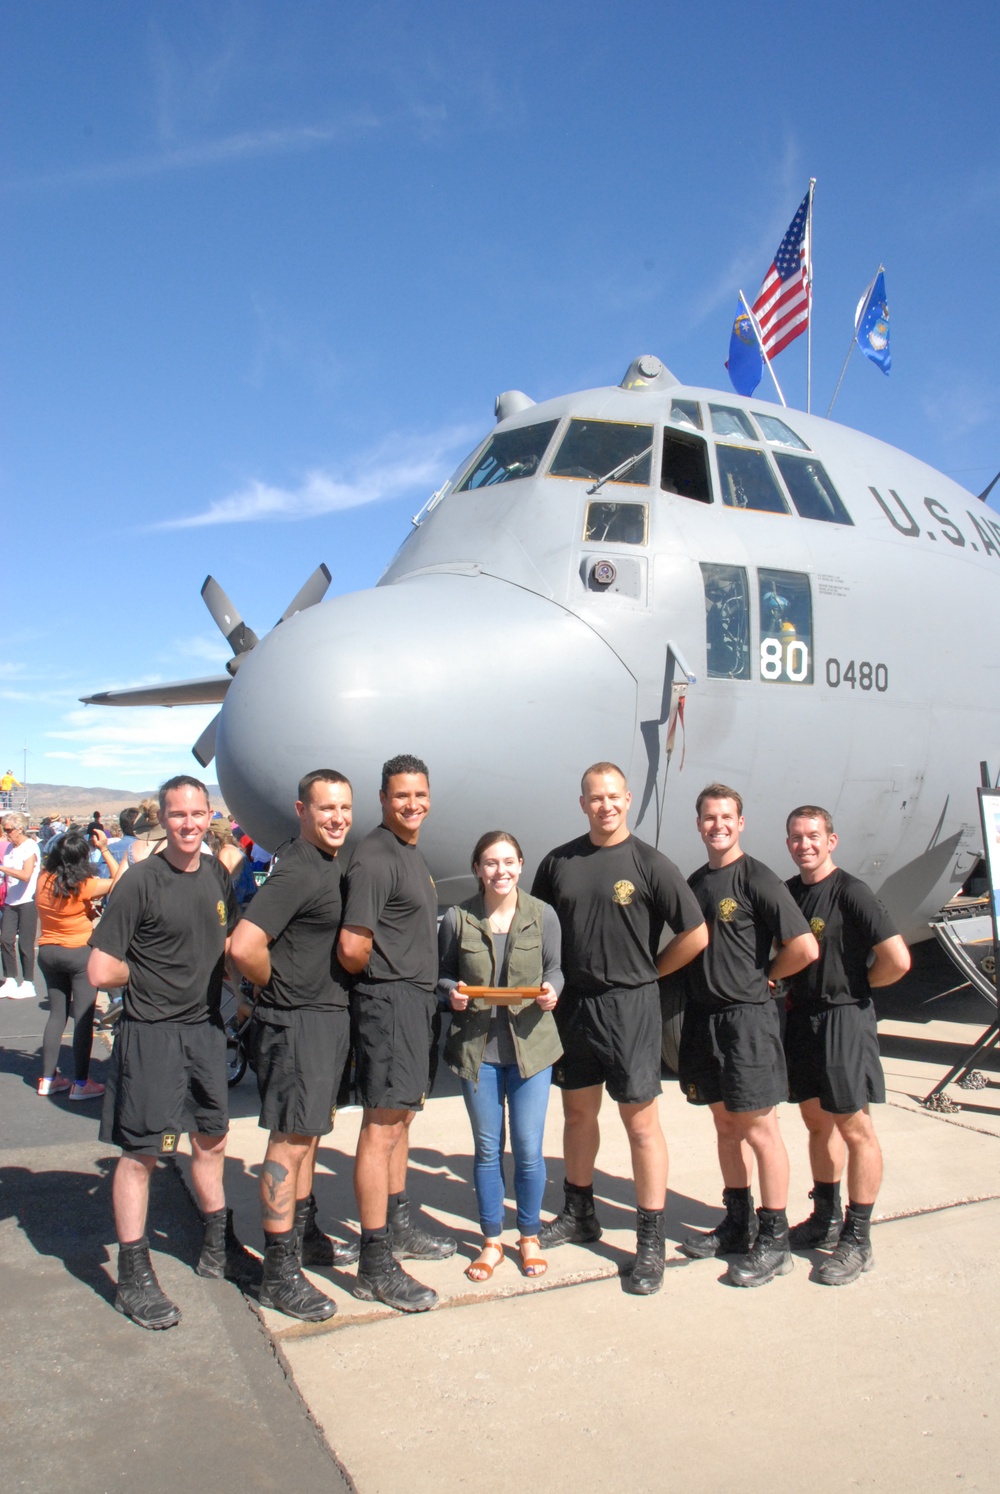 Airman Baylee Hunt and the U.S. Army Golden Knights